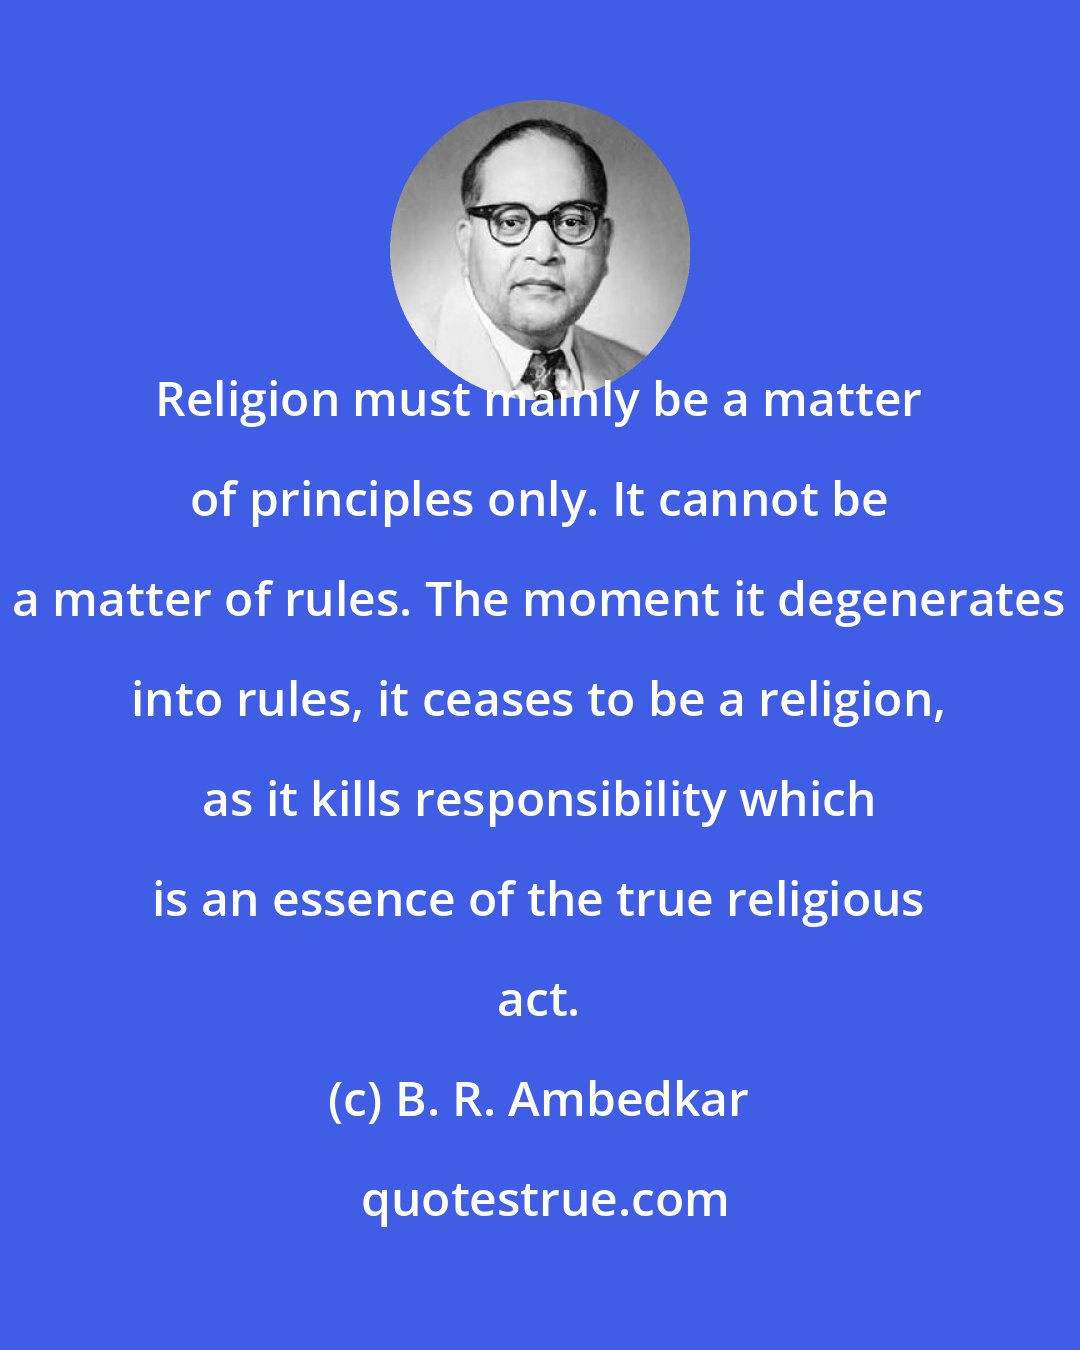 B. R. Ambedkar: Religion must mainly be a matter of principles only. It cannot be a matter of rules. The moment it degenerates into rules, it ceases to be a religion, as it kills responsibility which is an essence of the true religious act.